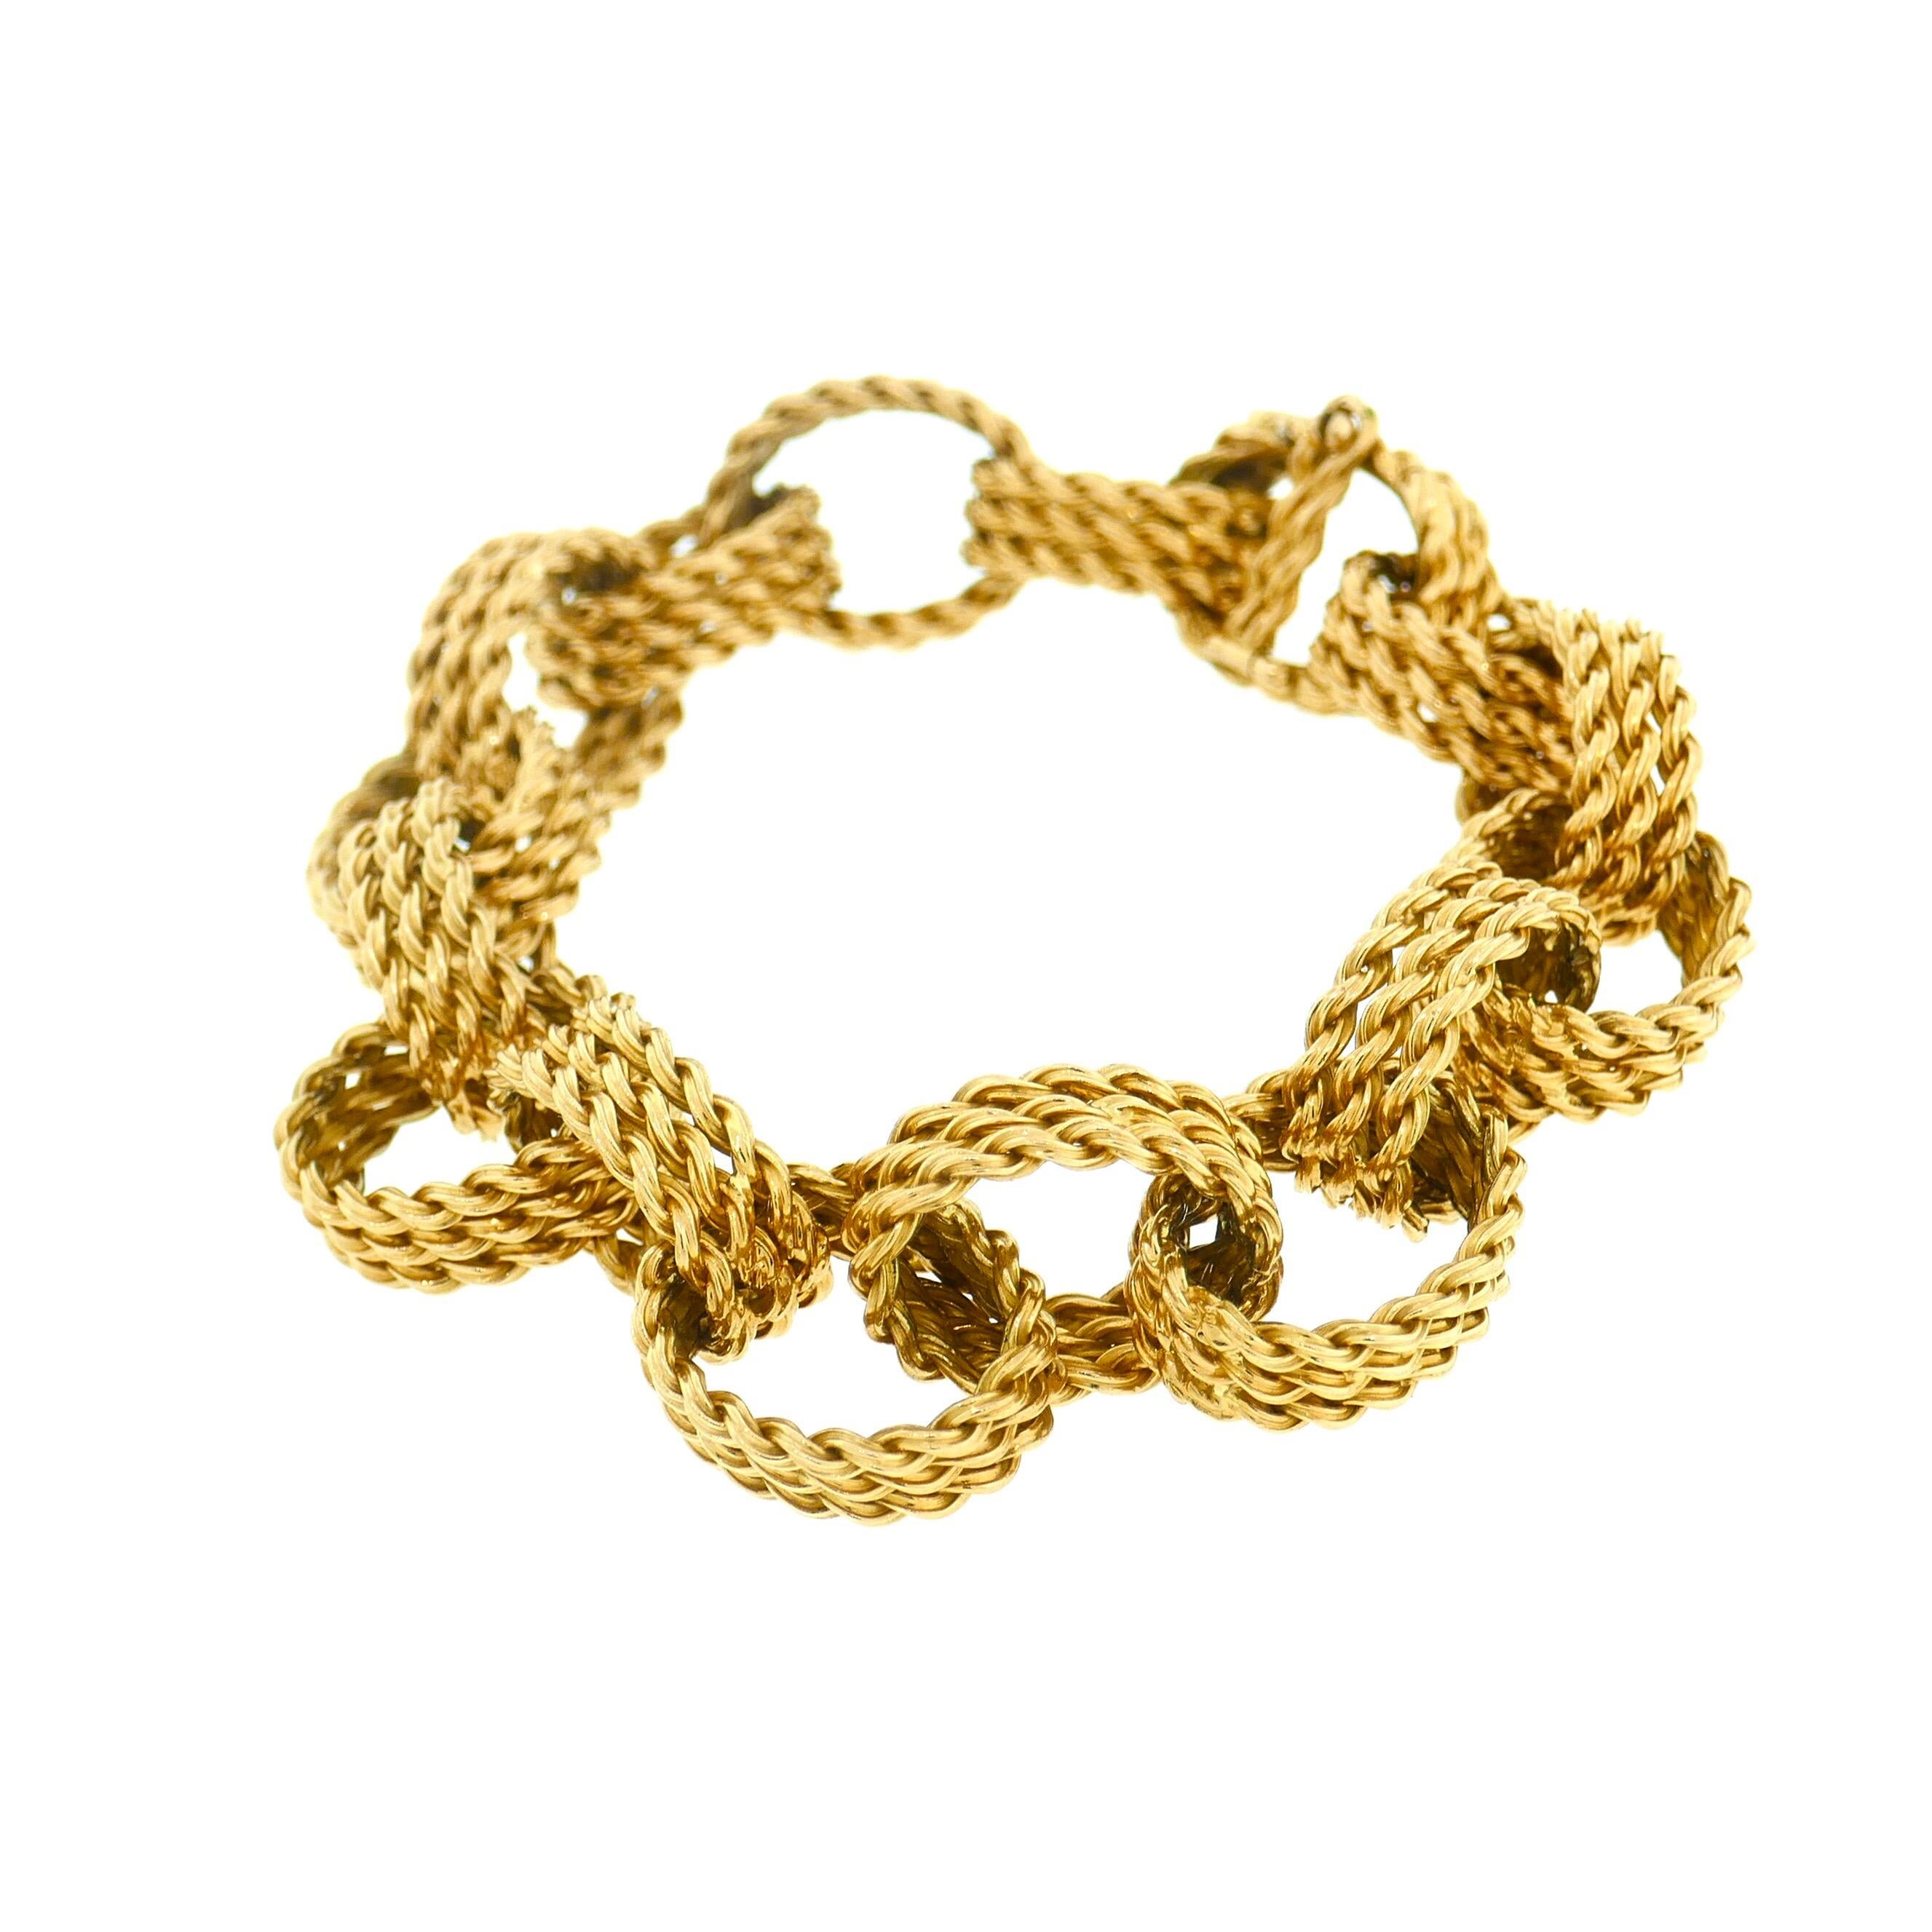  Tiffany & Co. France Yellow Gold Textured Link Bracelet

This is a beautiful Tiffany & Co. bracelet made in France. It features 18K yellow gold textured links. It is a very wearable piece that is sure to get a lot of wrist time. 

Dimensions: 7.5